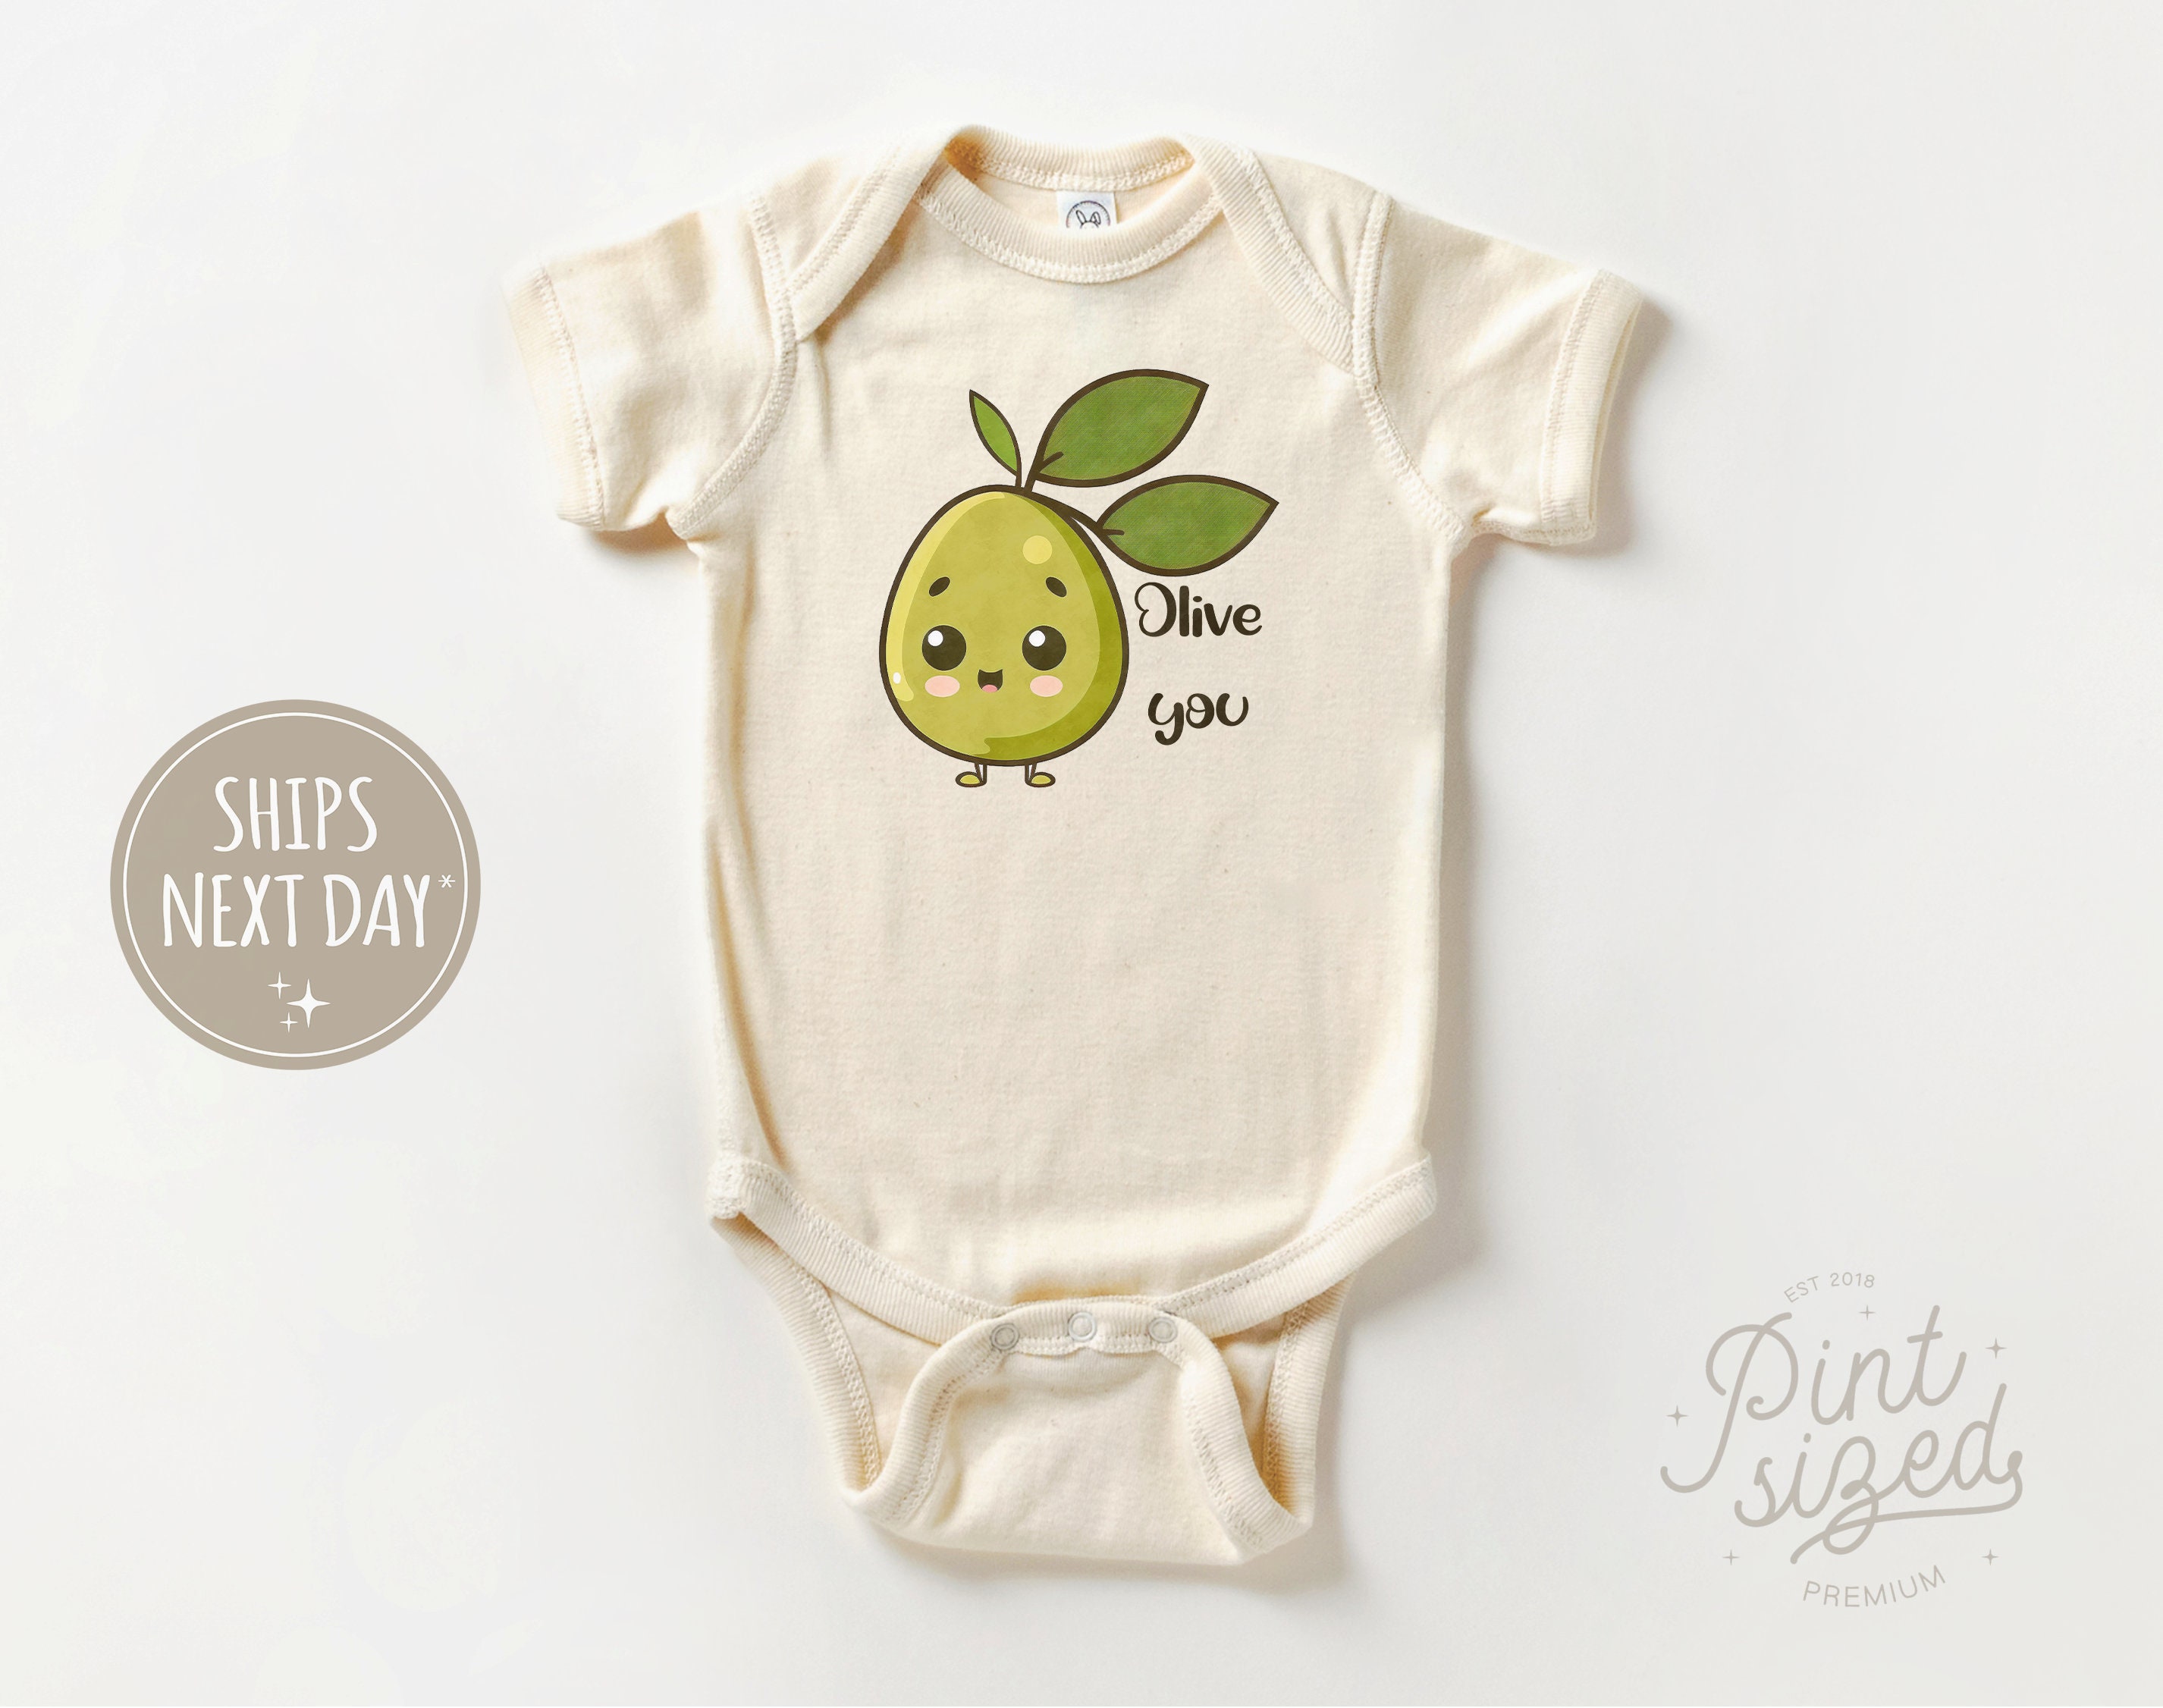 Pin by Olive on BAIRNS  Baby boy fashion, Baby boy outfits, Baby fashion